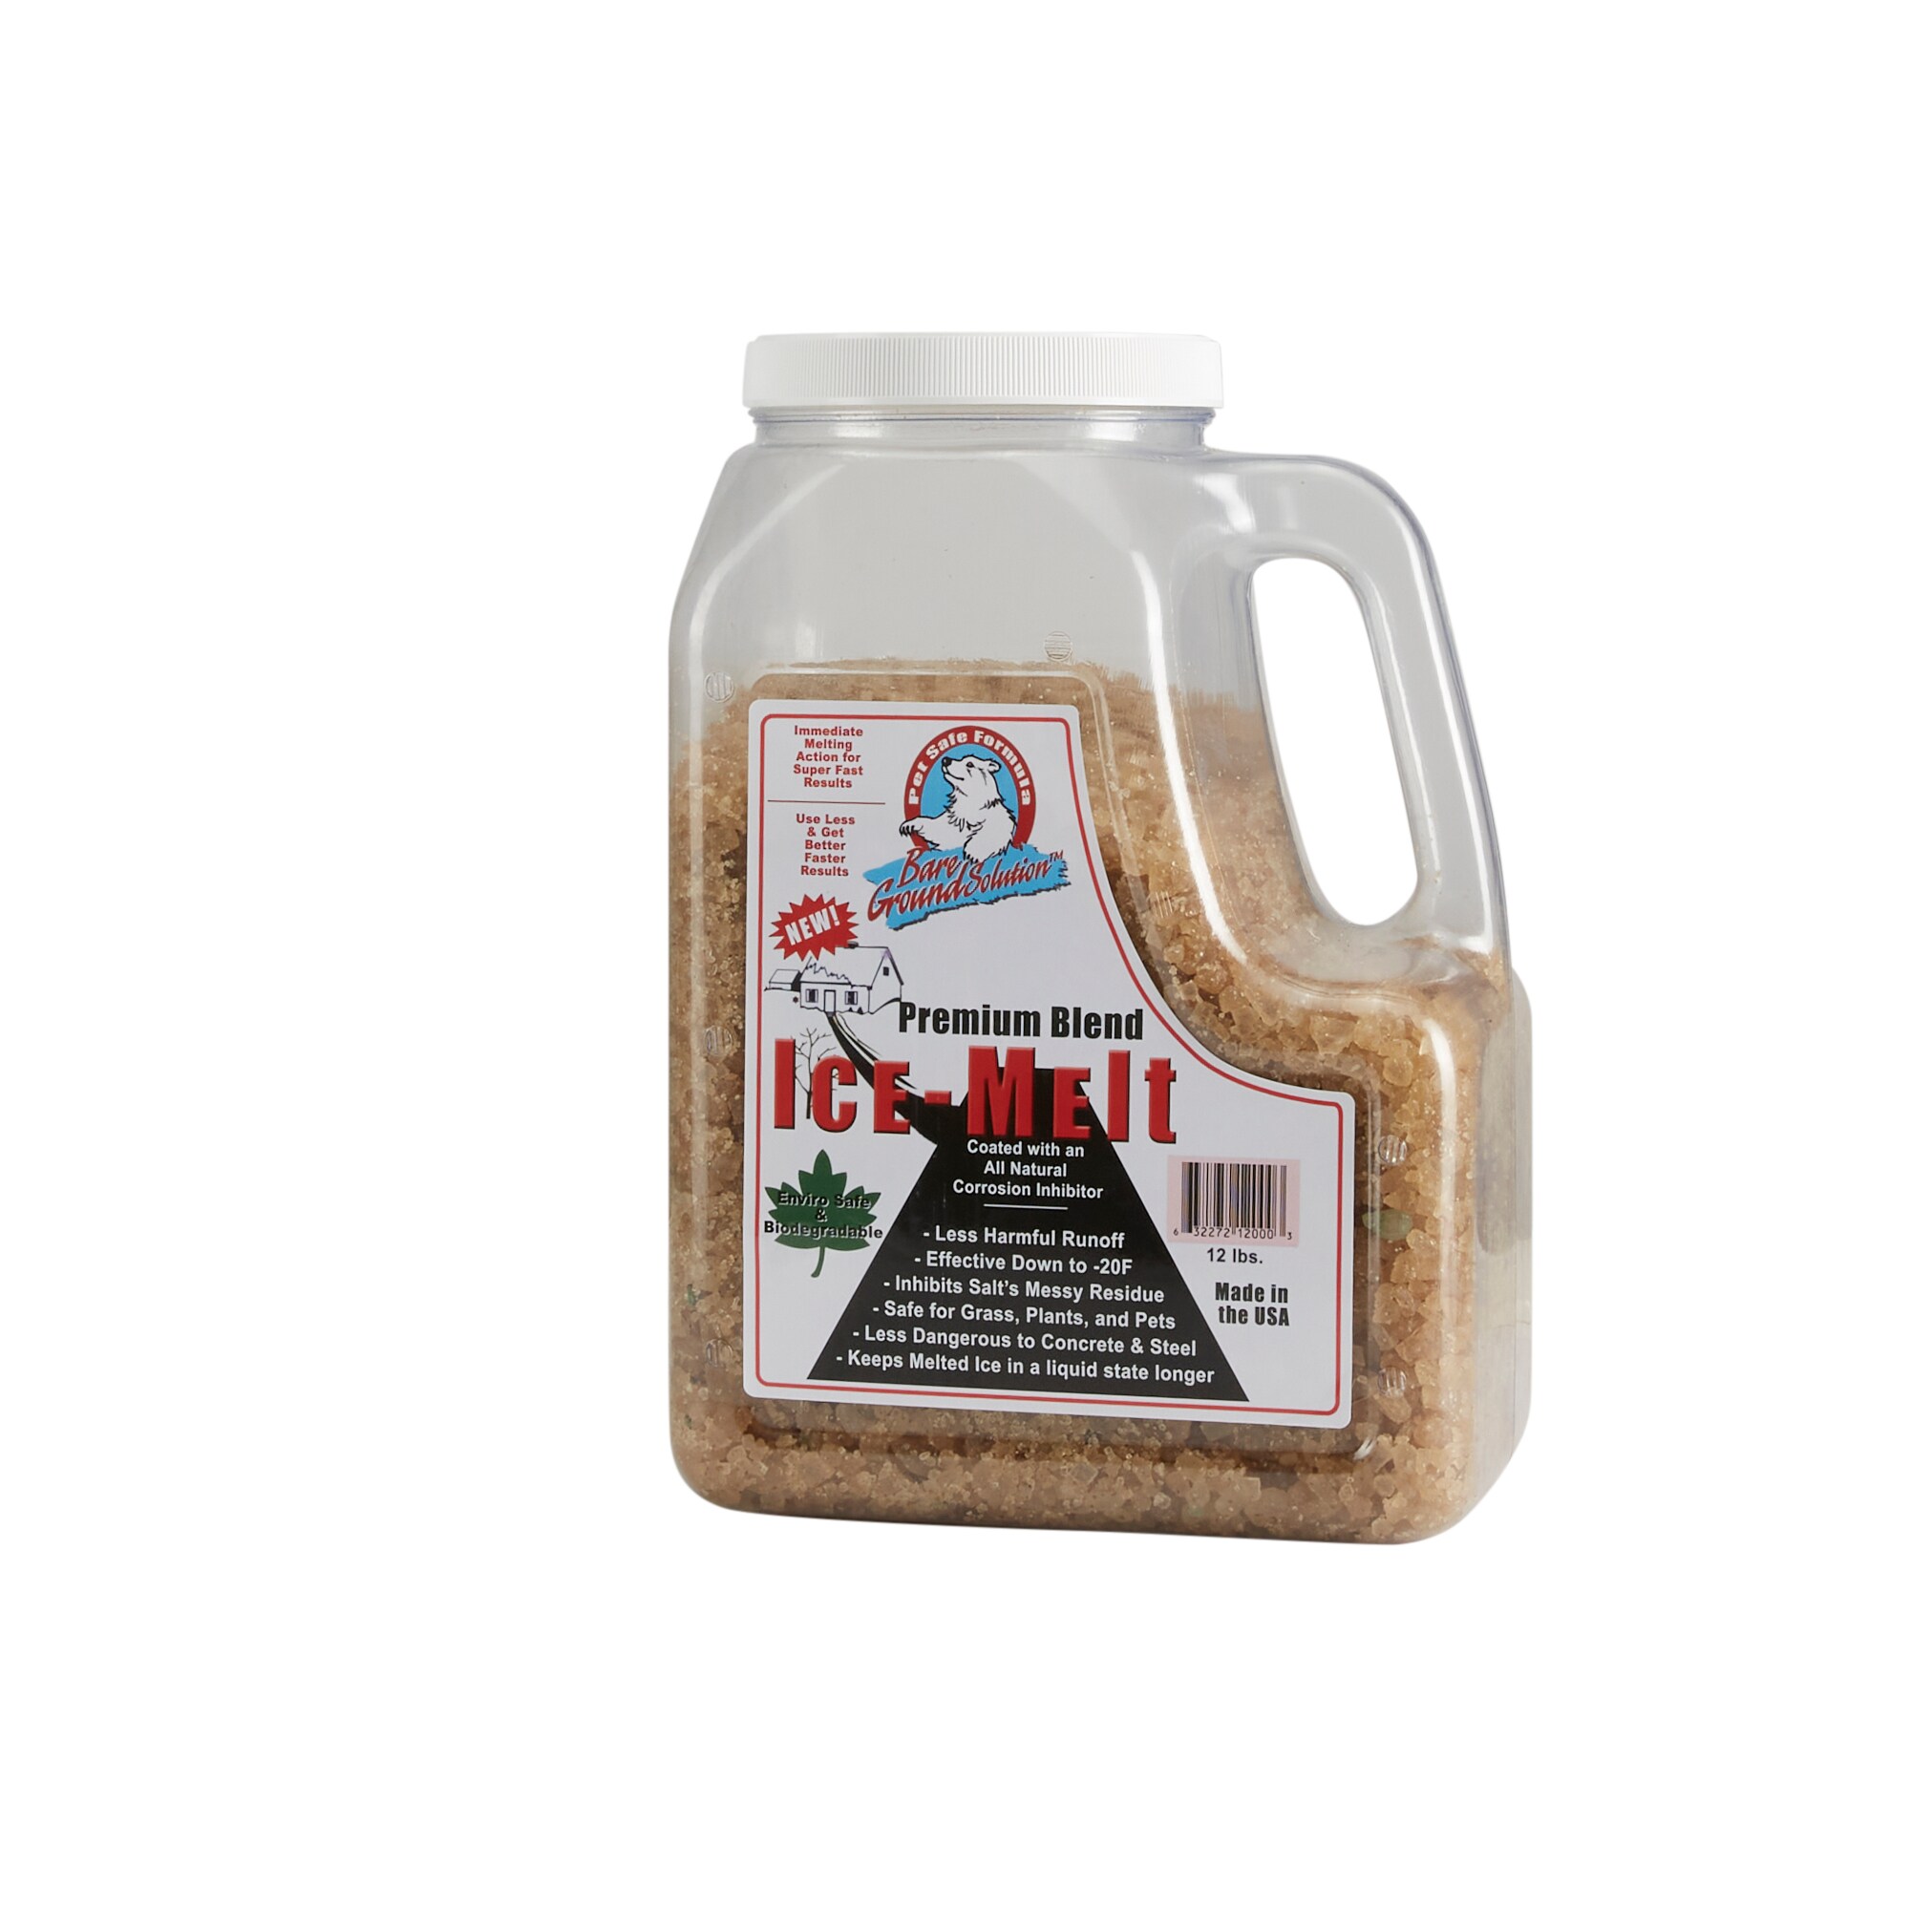 Bare Ground CSSLGP-12 Premium Coated Granular Ice Melt with Slipgrip Traction Granules in Shaker Jug 12 lbs 